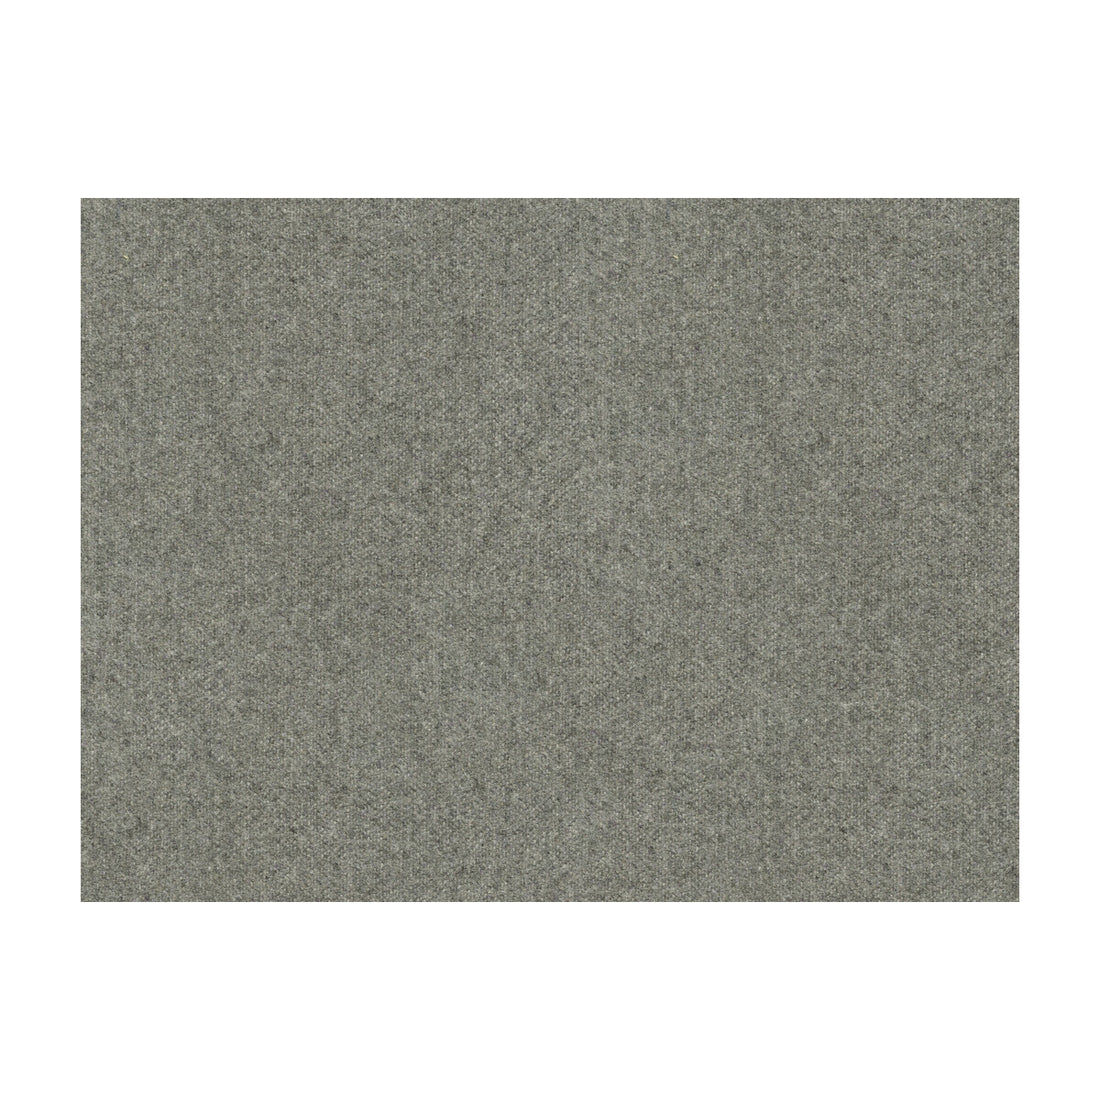 Chevalier Wool fabric in greystone color - pattern 8013149.2121.0 - by Brunschwig &amp; Fils